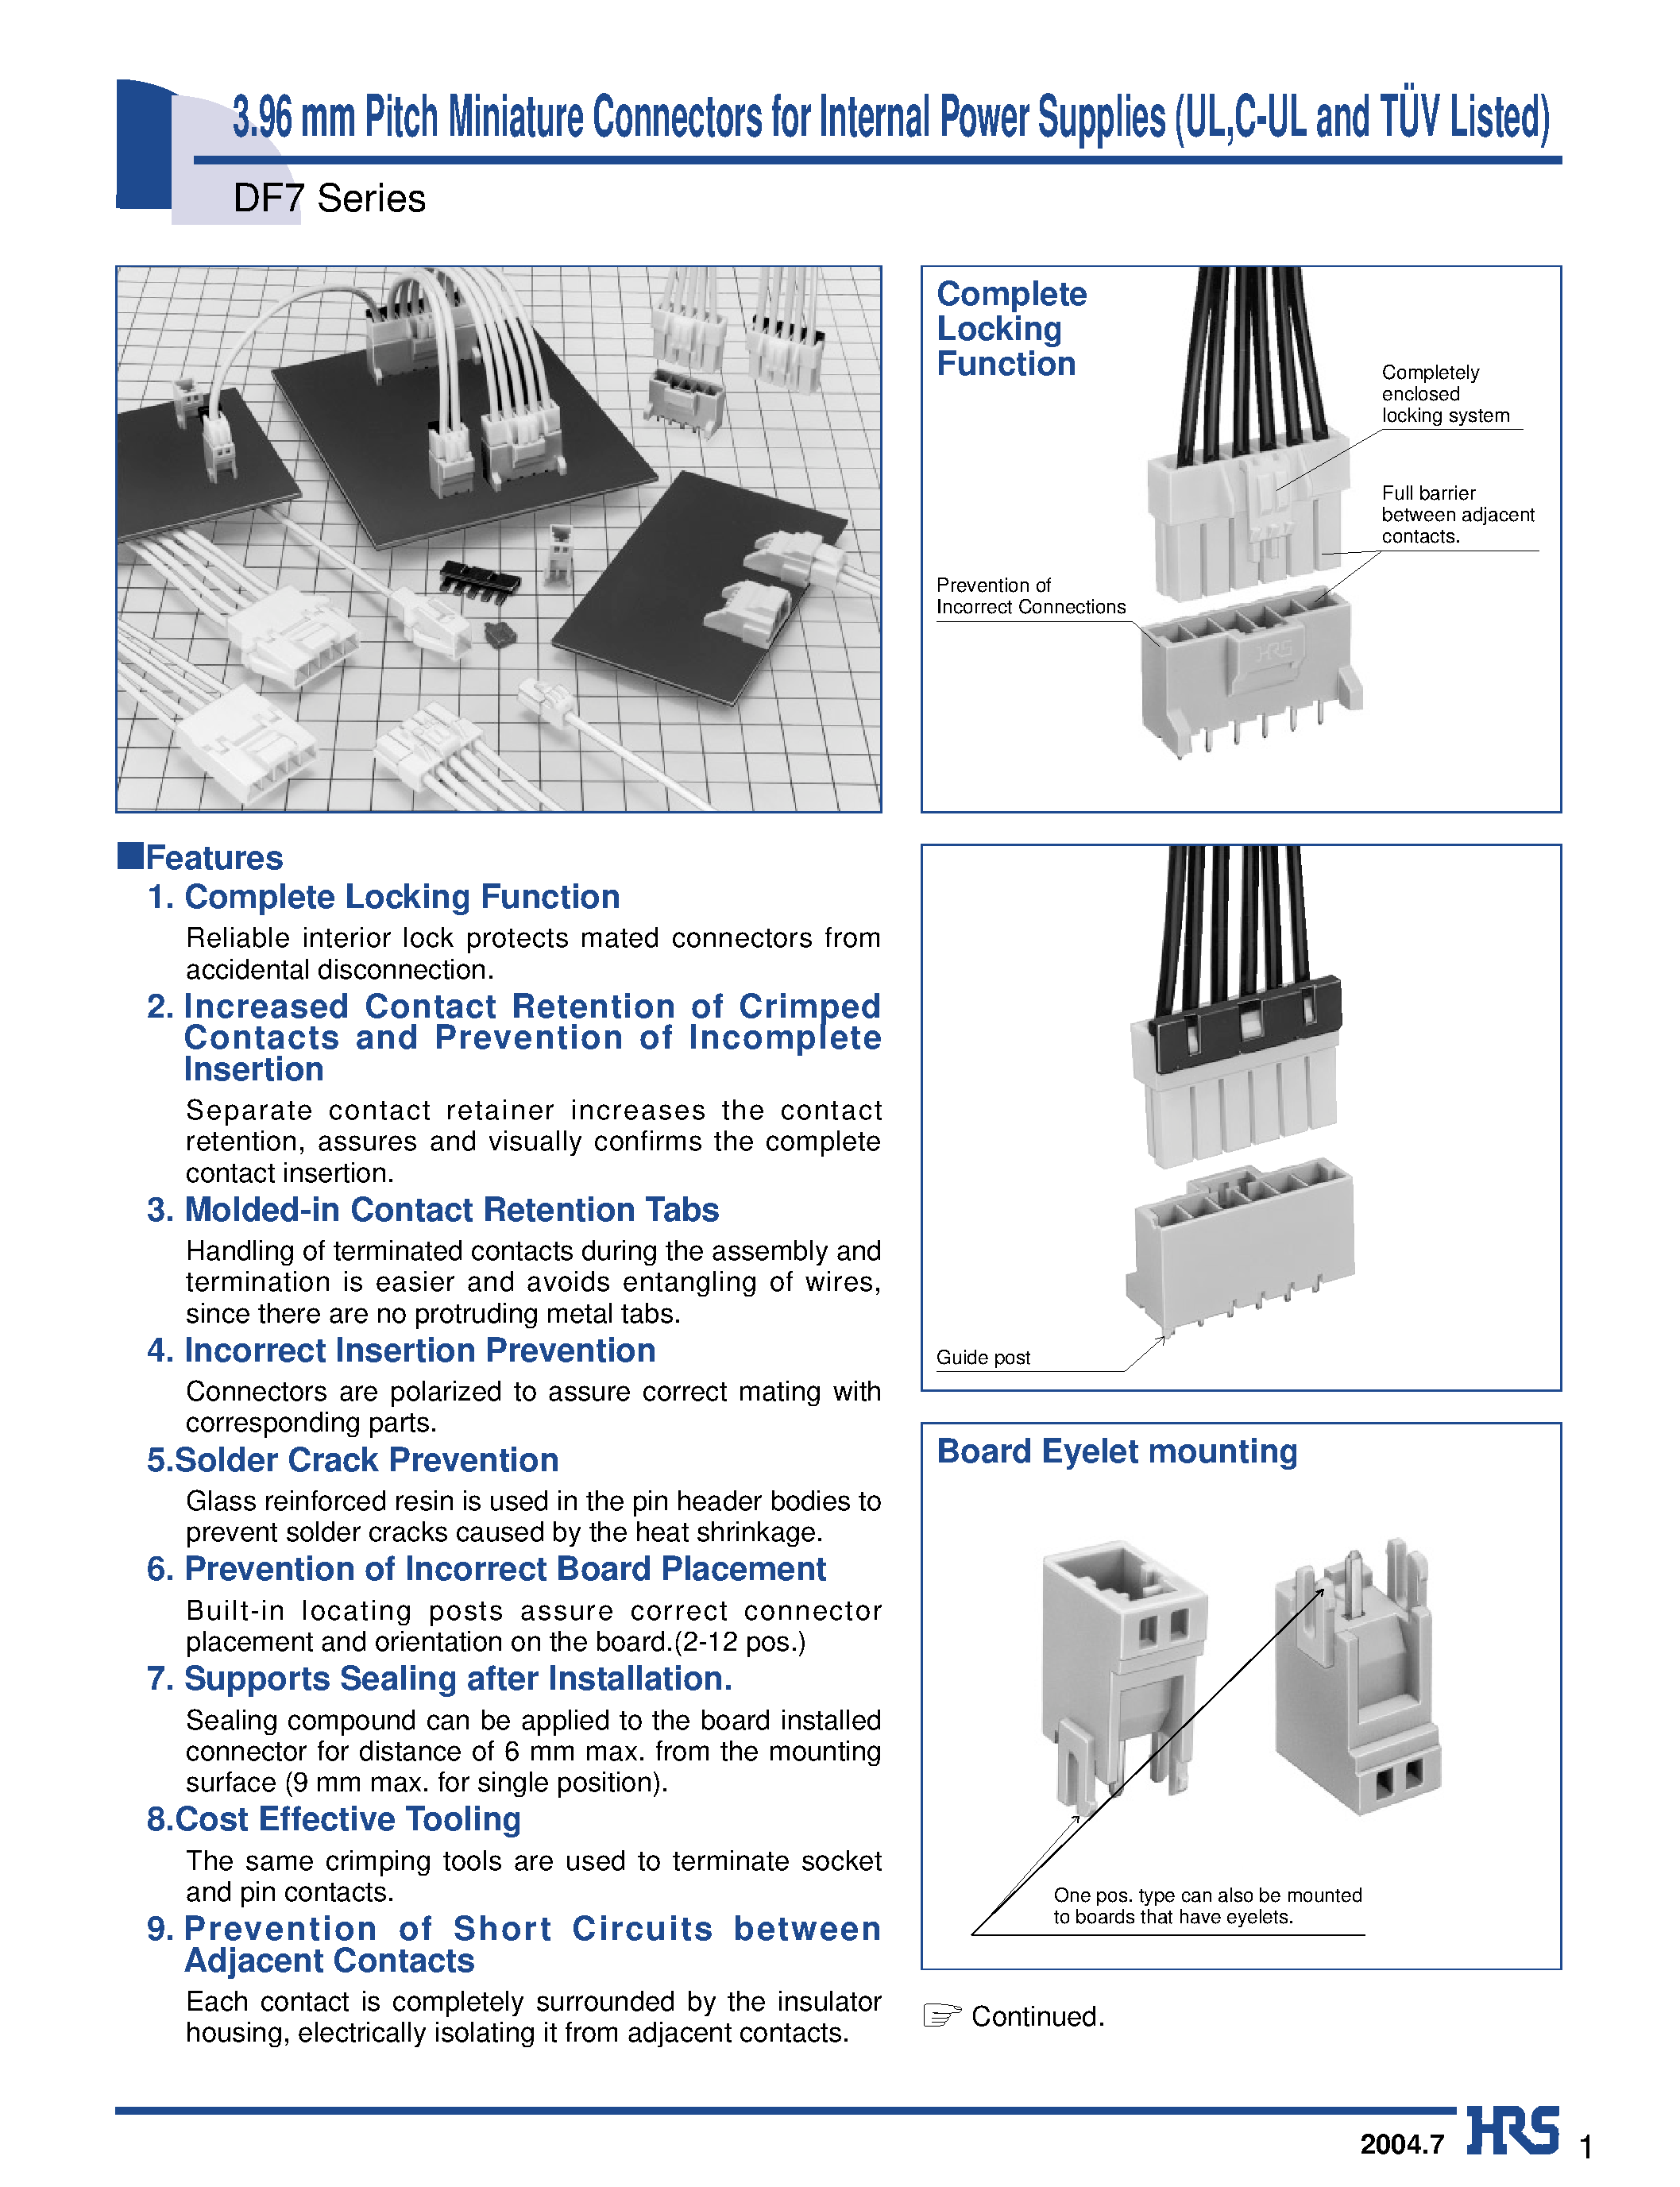 Datasheet DF7-4P-3.96C - 3.96 mm Pitch Miniature Connectors for Internal Power Supplies (UL /C-UL and TUV Listed) page 1